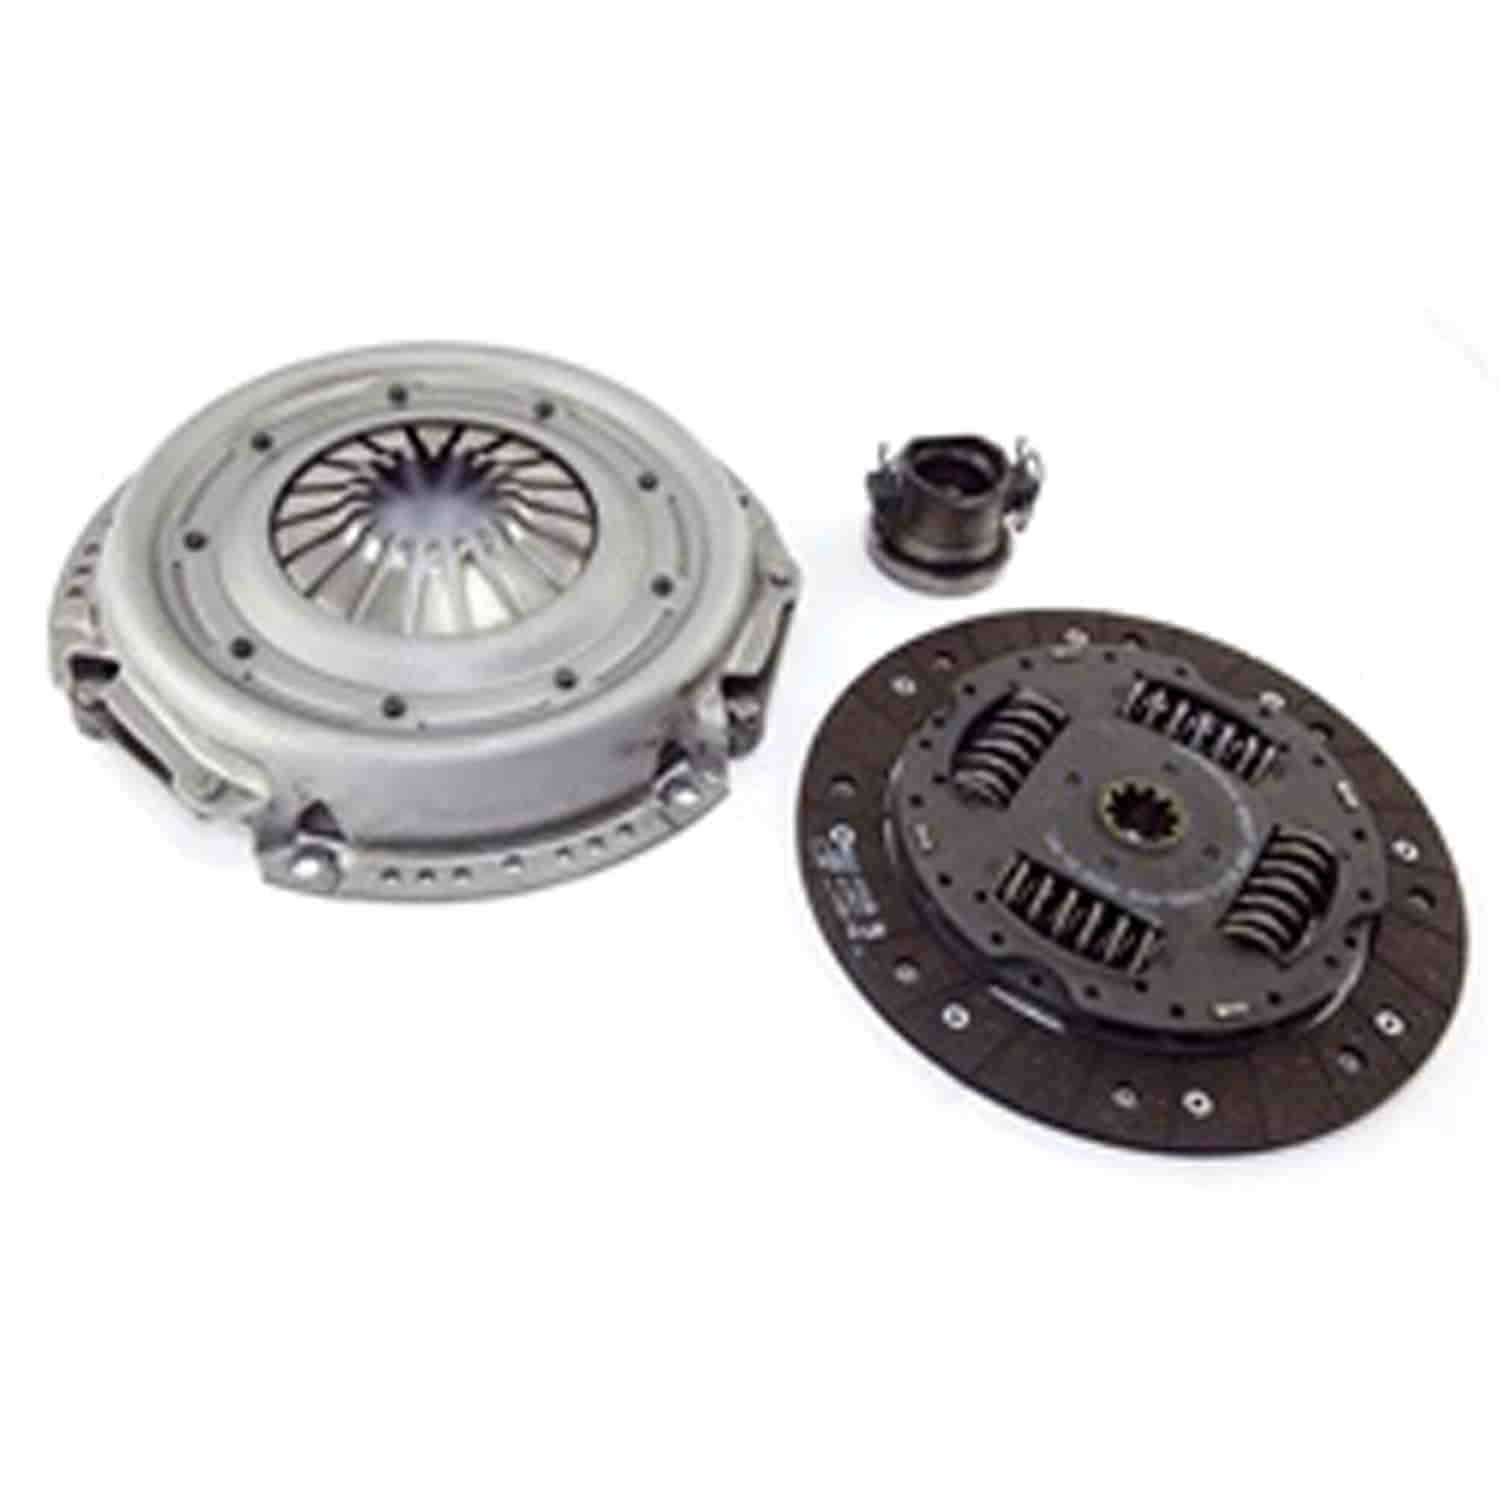 This regular clutch kit fits 02-07 Jeep Liberty with a 3.7L. The regular clutch kit includes the pre